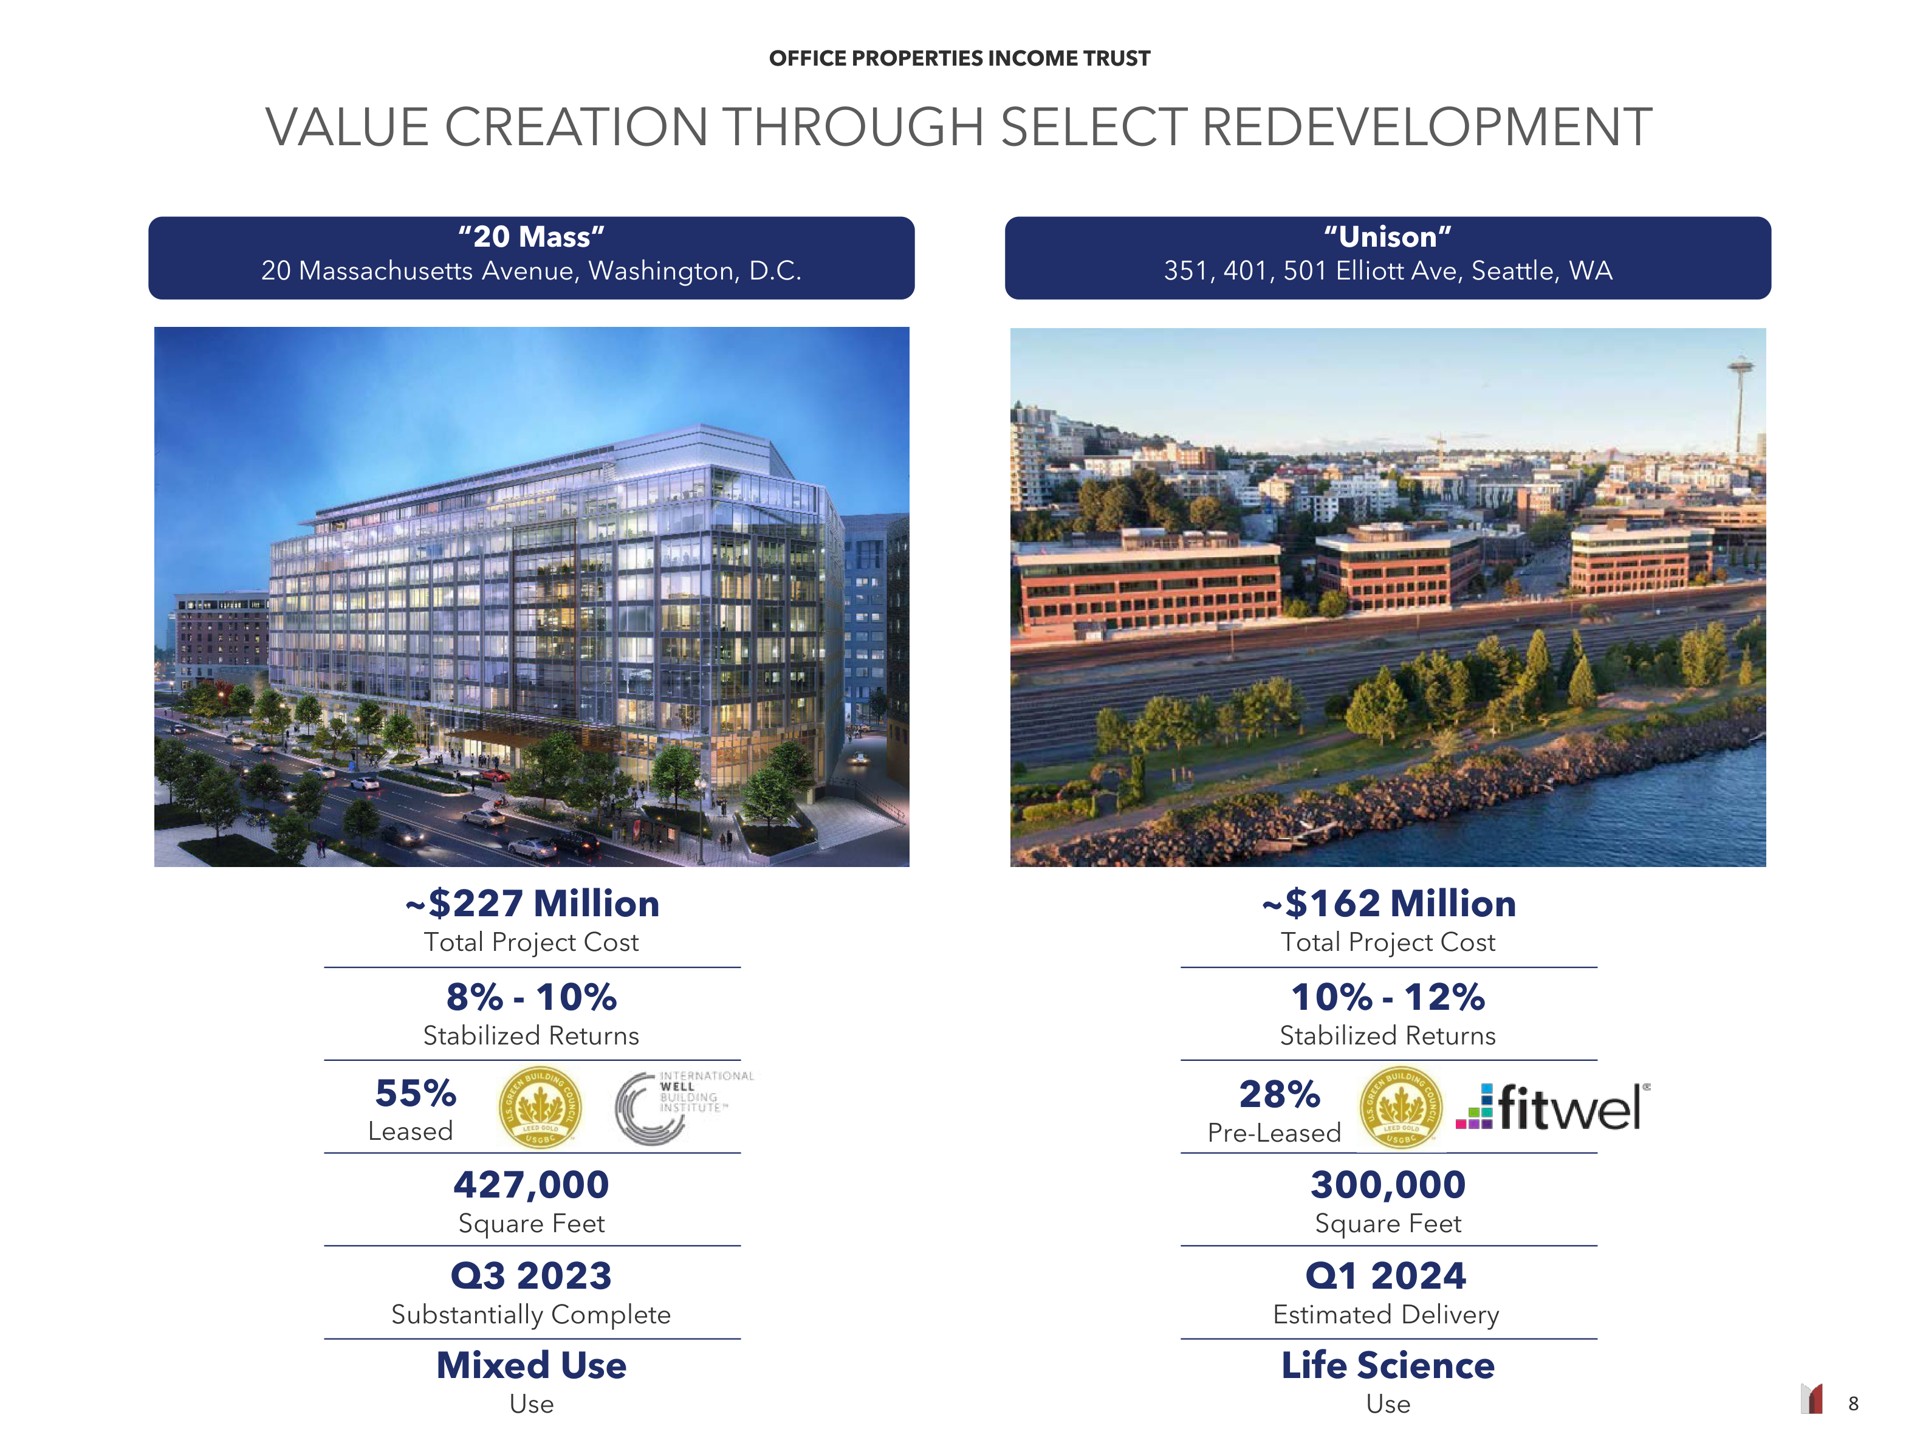 value creation through select redevelopment million mixed use million life science | Office Properties Income Trust